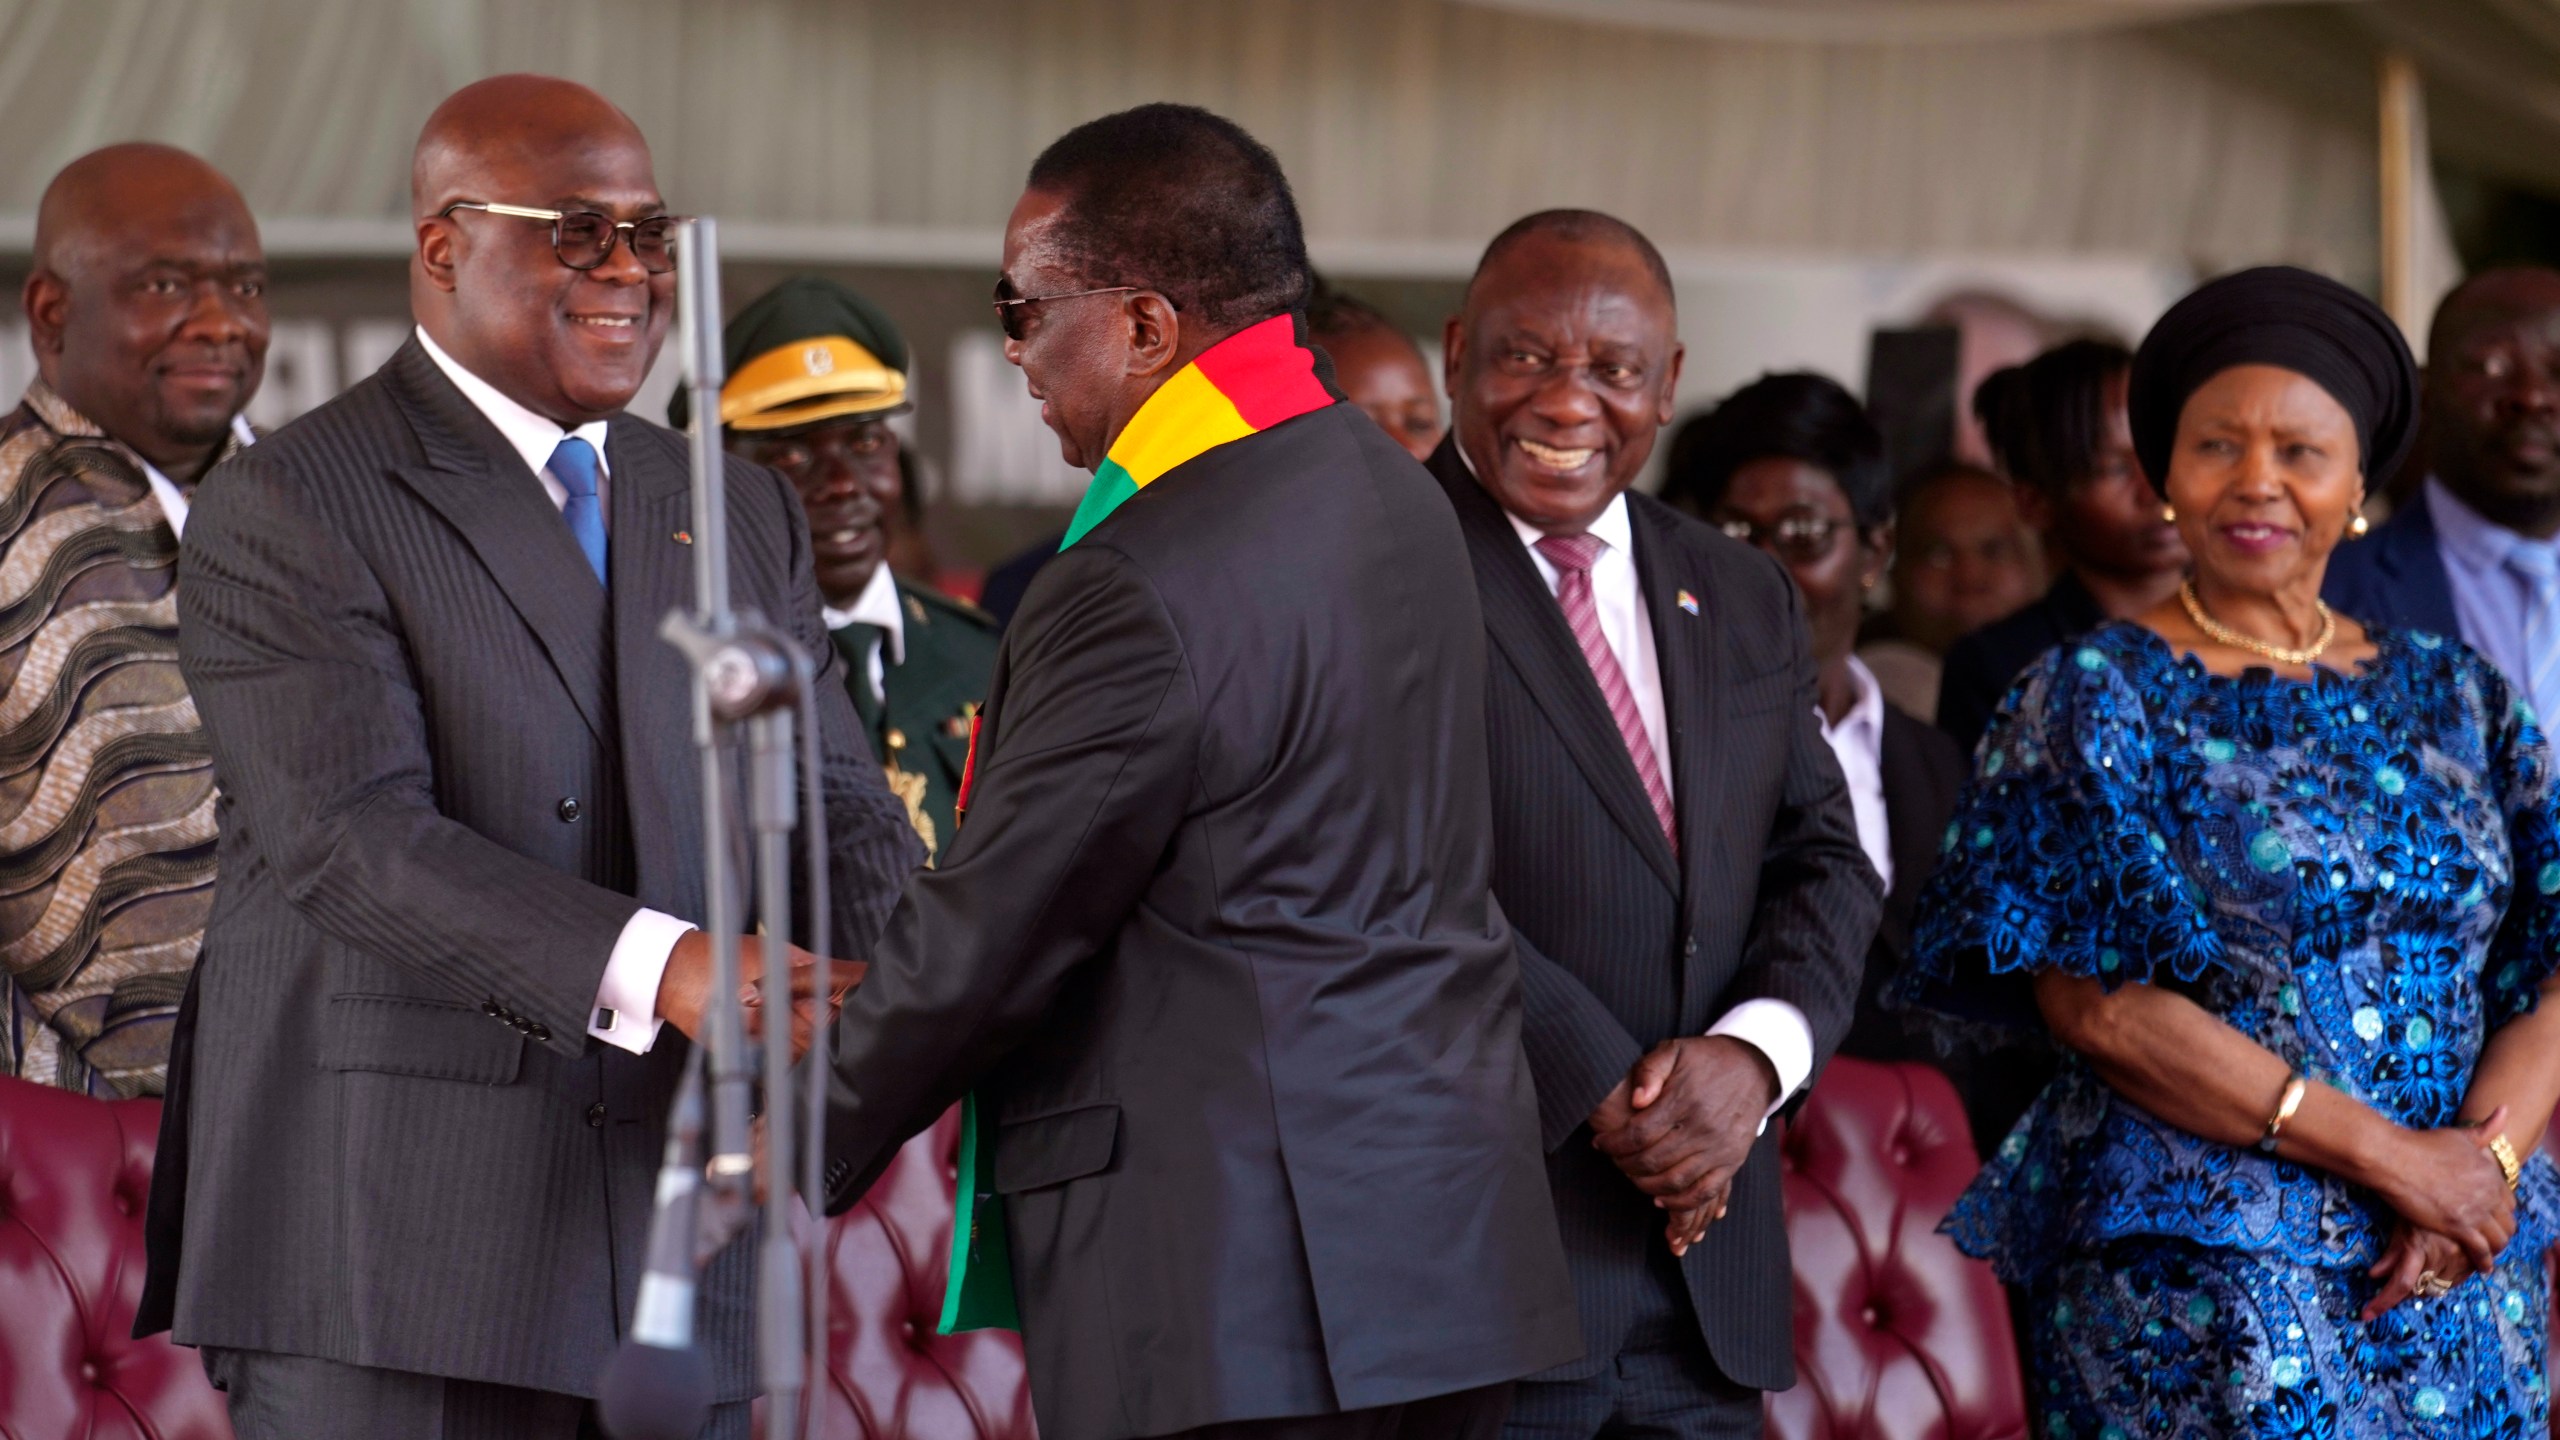 No, the USA did not send any congratulatory message to President Emmerson Mnangagwa